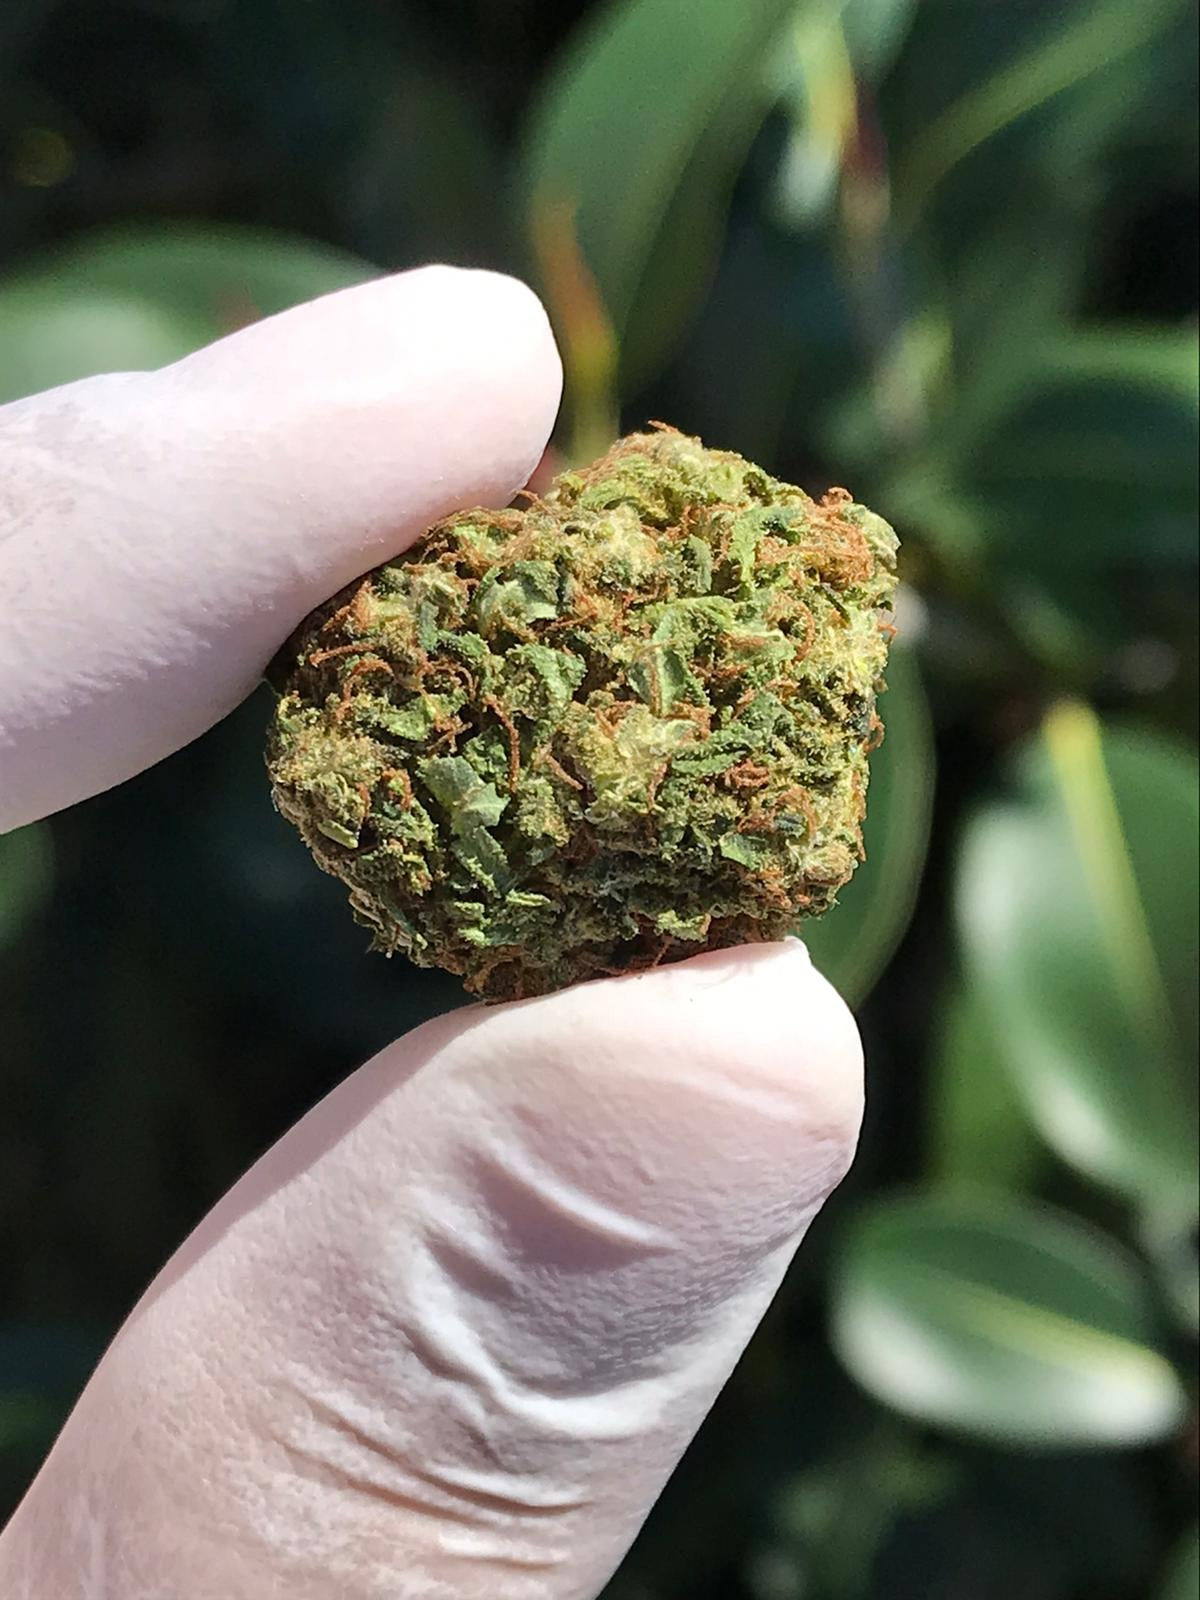 Top 5 Benefits of Using CBD Flowers for Wellness